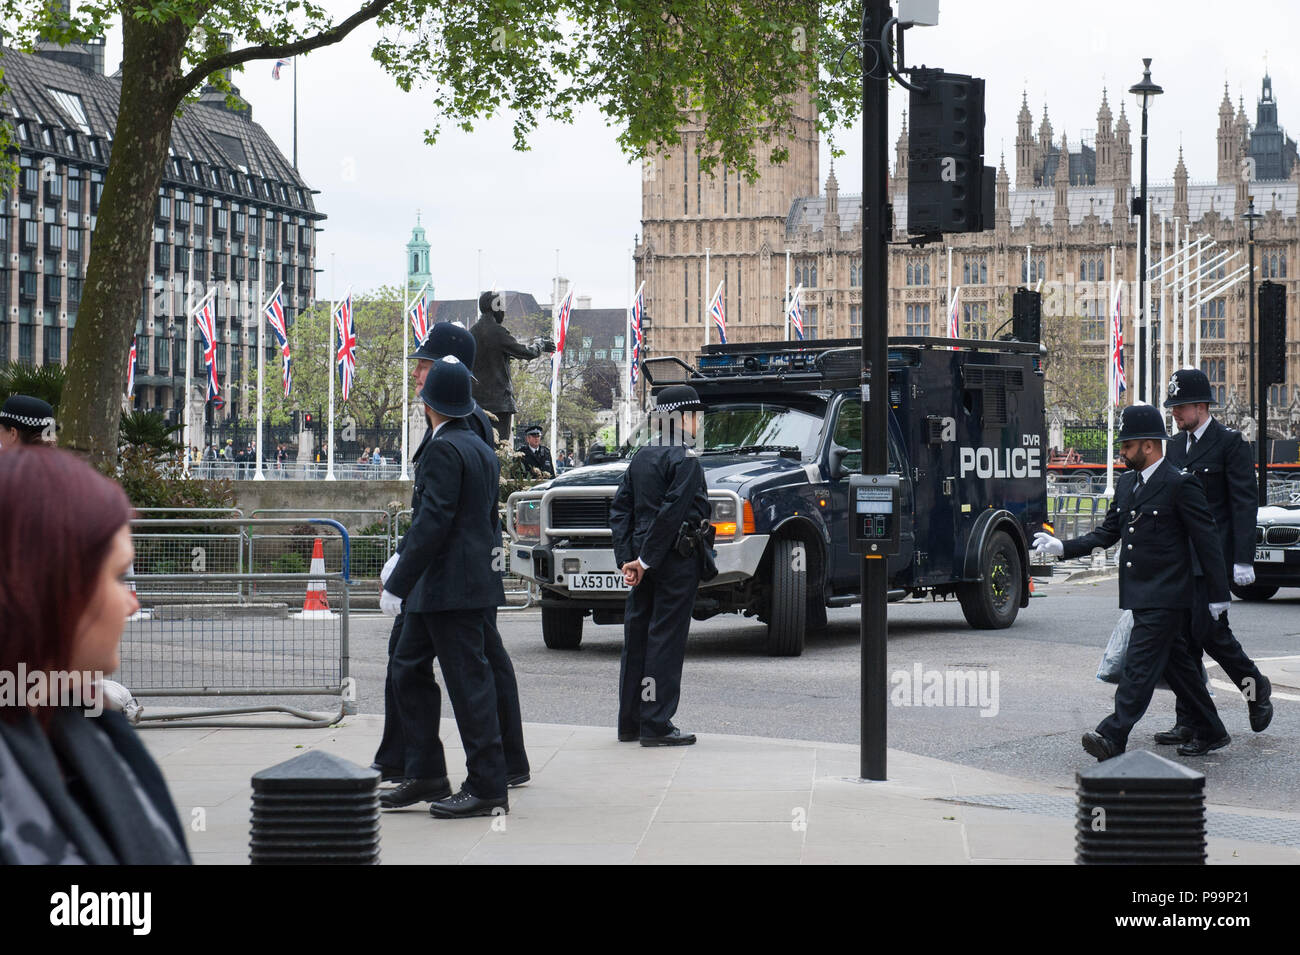 Whitehall, London, UK. 18th May 2016. Security in Westminster remains high this morning as hundreds of police officers and road block measures deploye Stock Photo